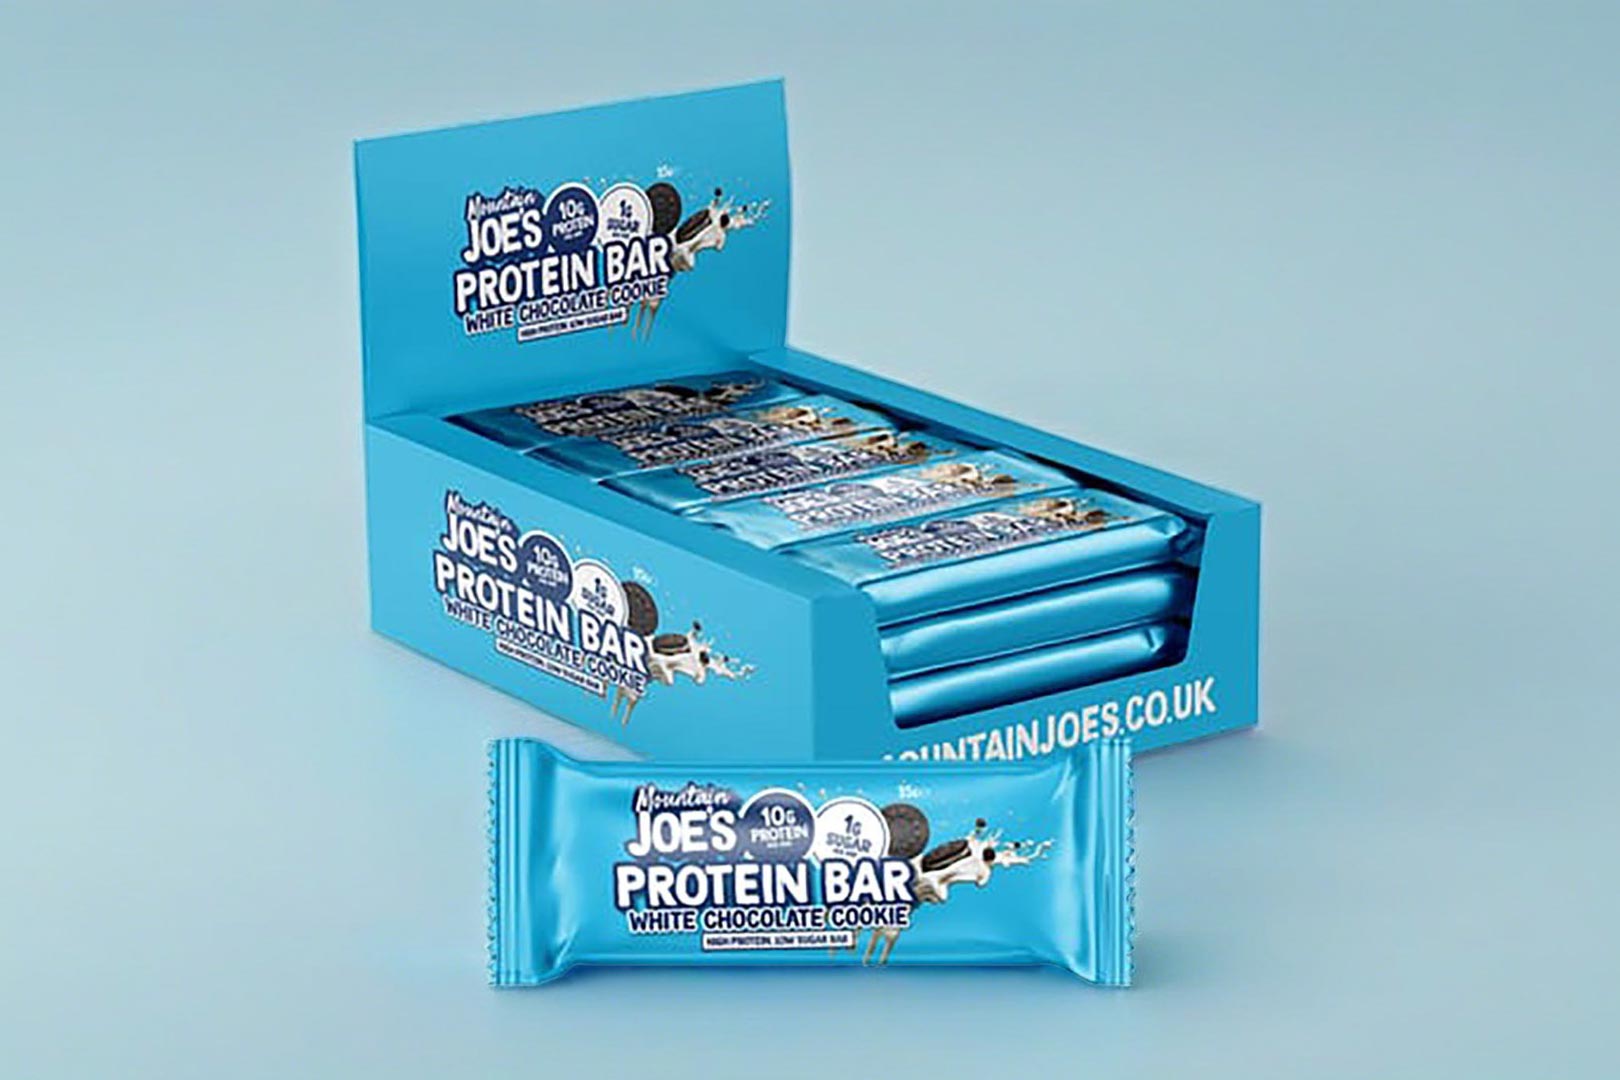 Barebells Soft Protein Bar Review: Another knockout from the